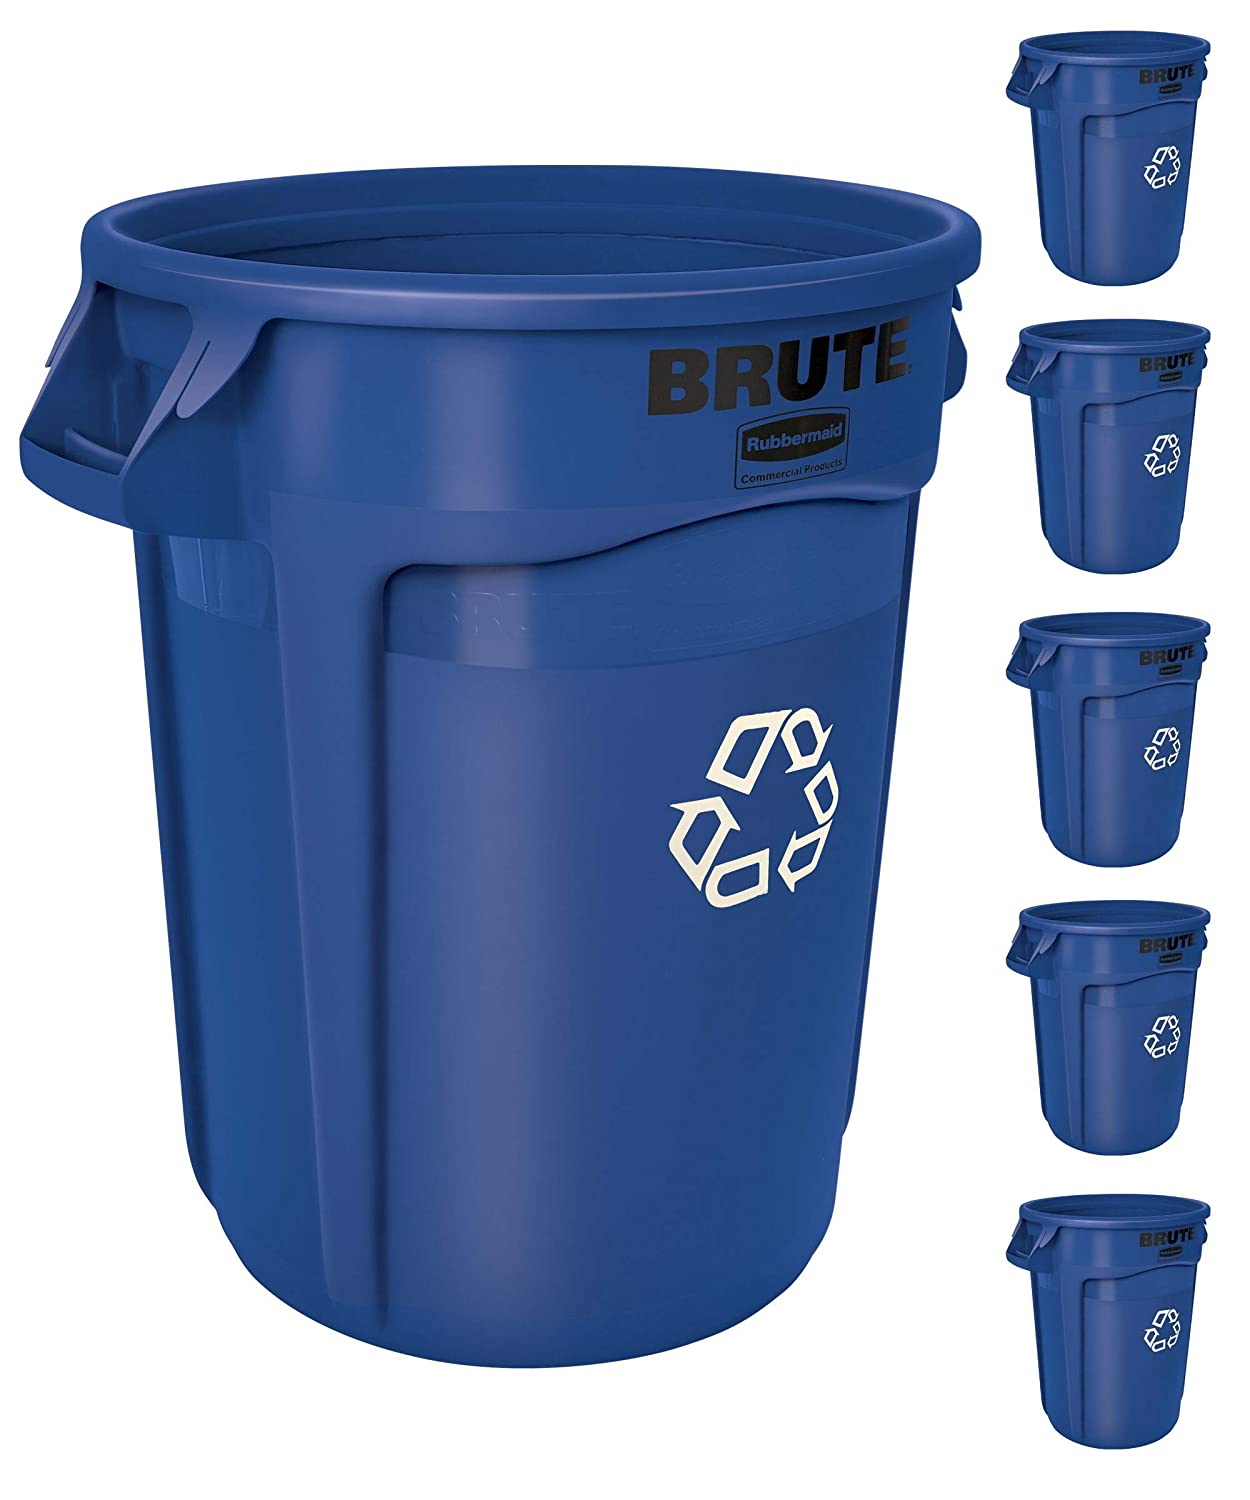 Rubbermaid 32-Gallon BRUTE Blue Recycling Container